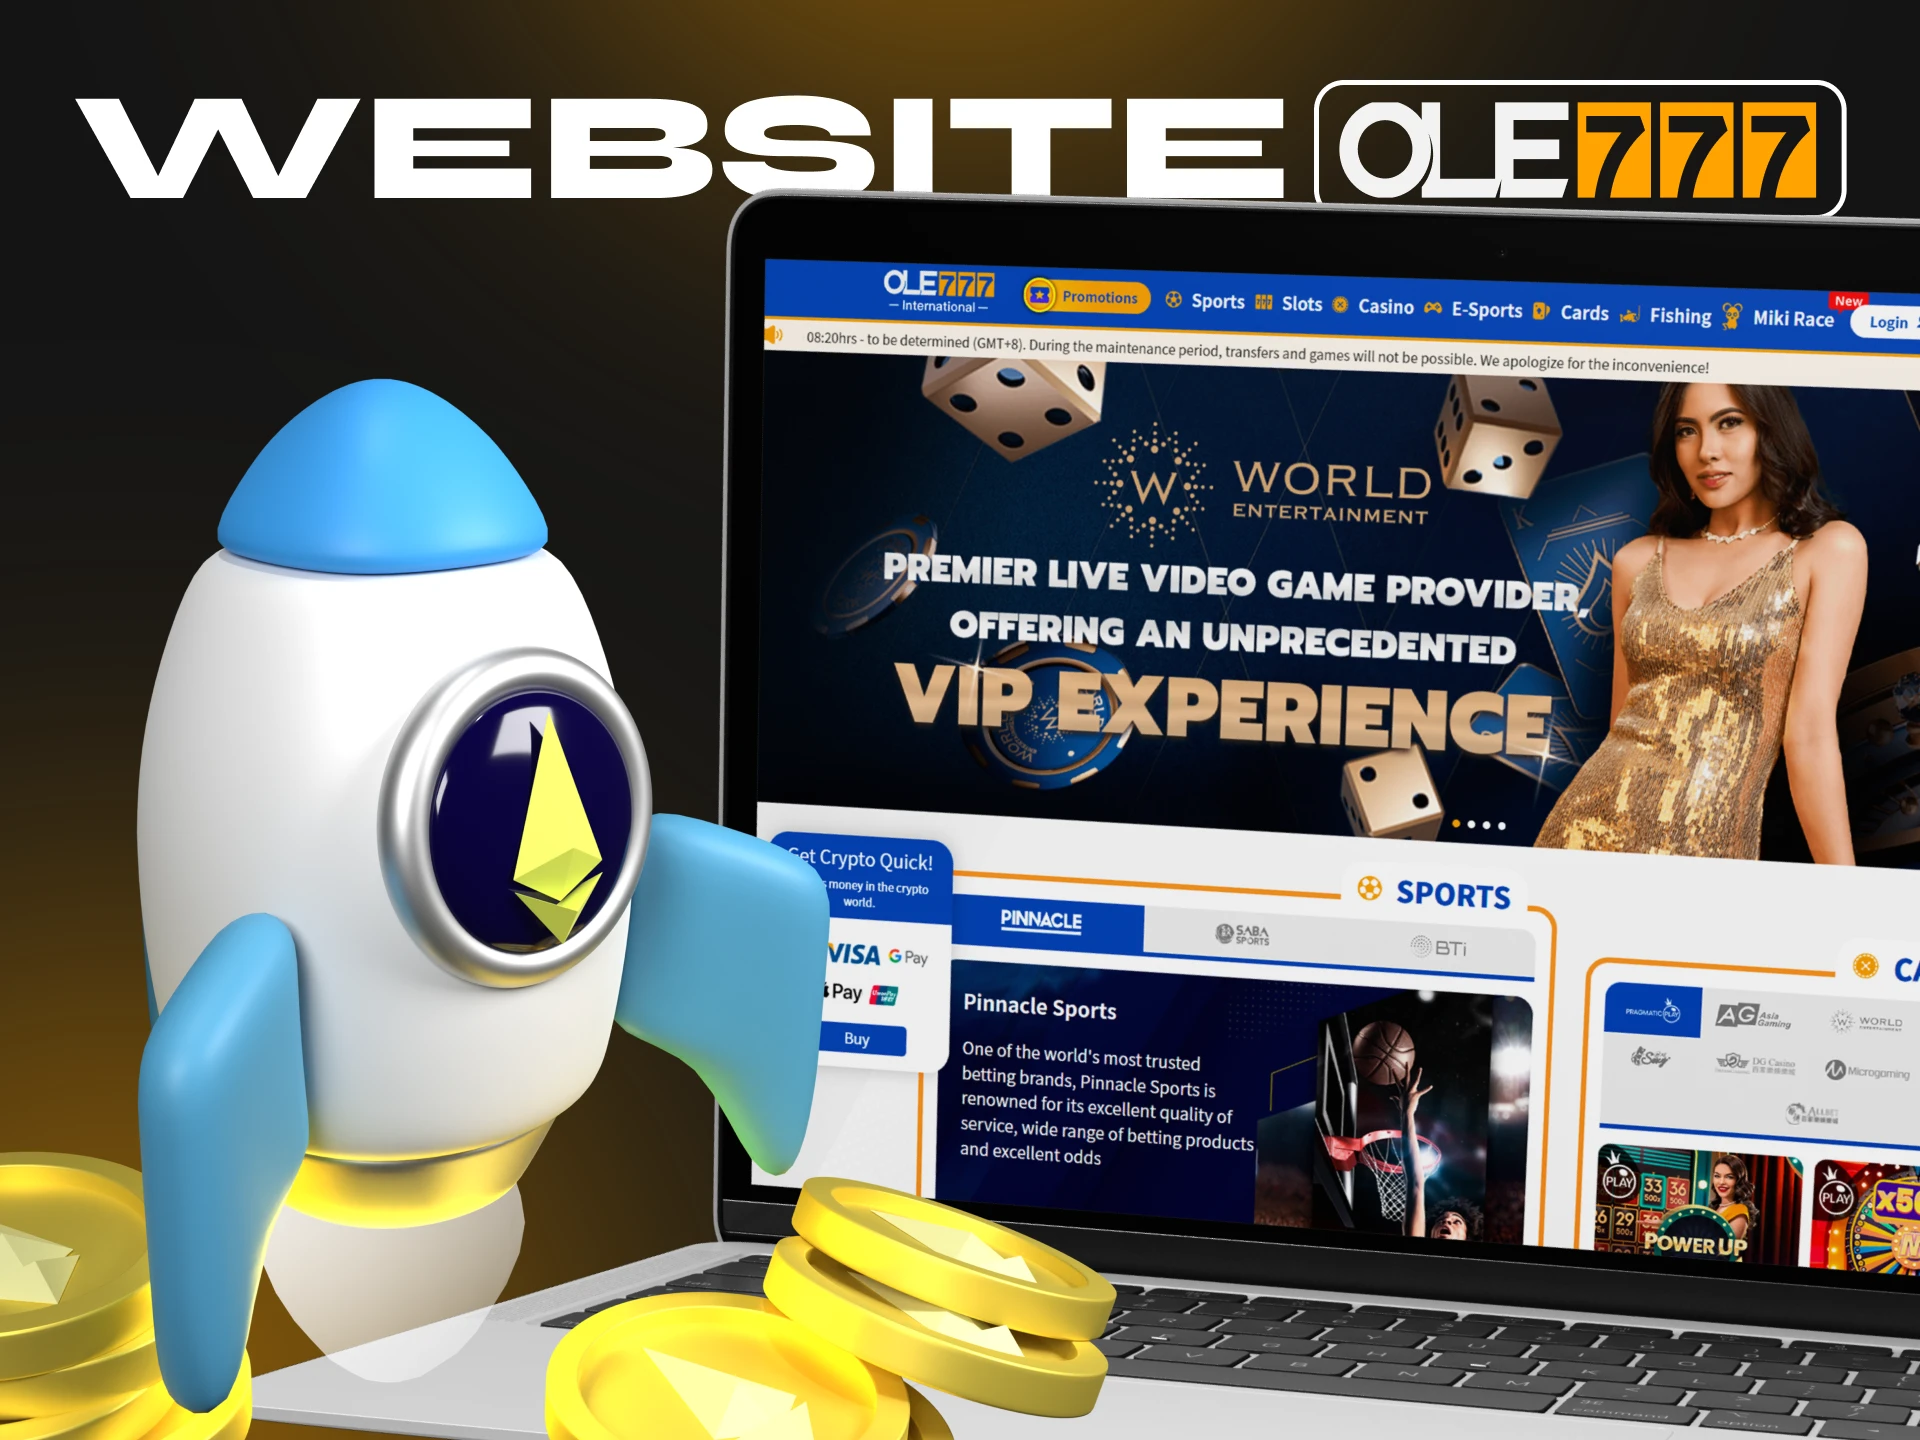 Casino Ole777 has a convenient and user-friendly website.